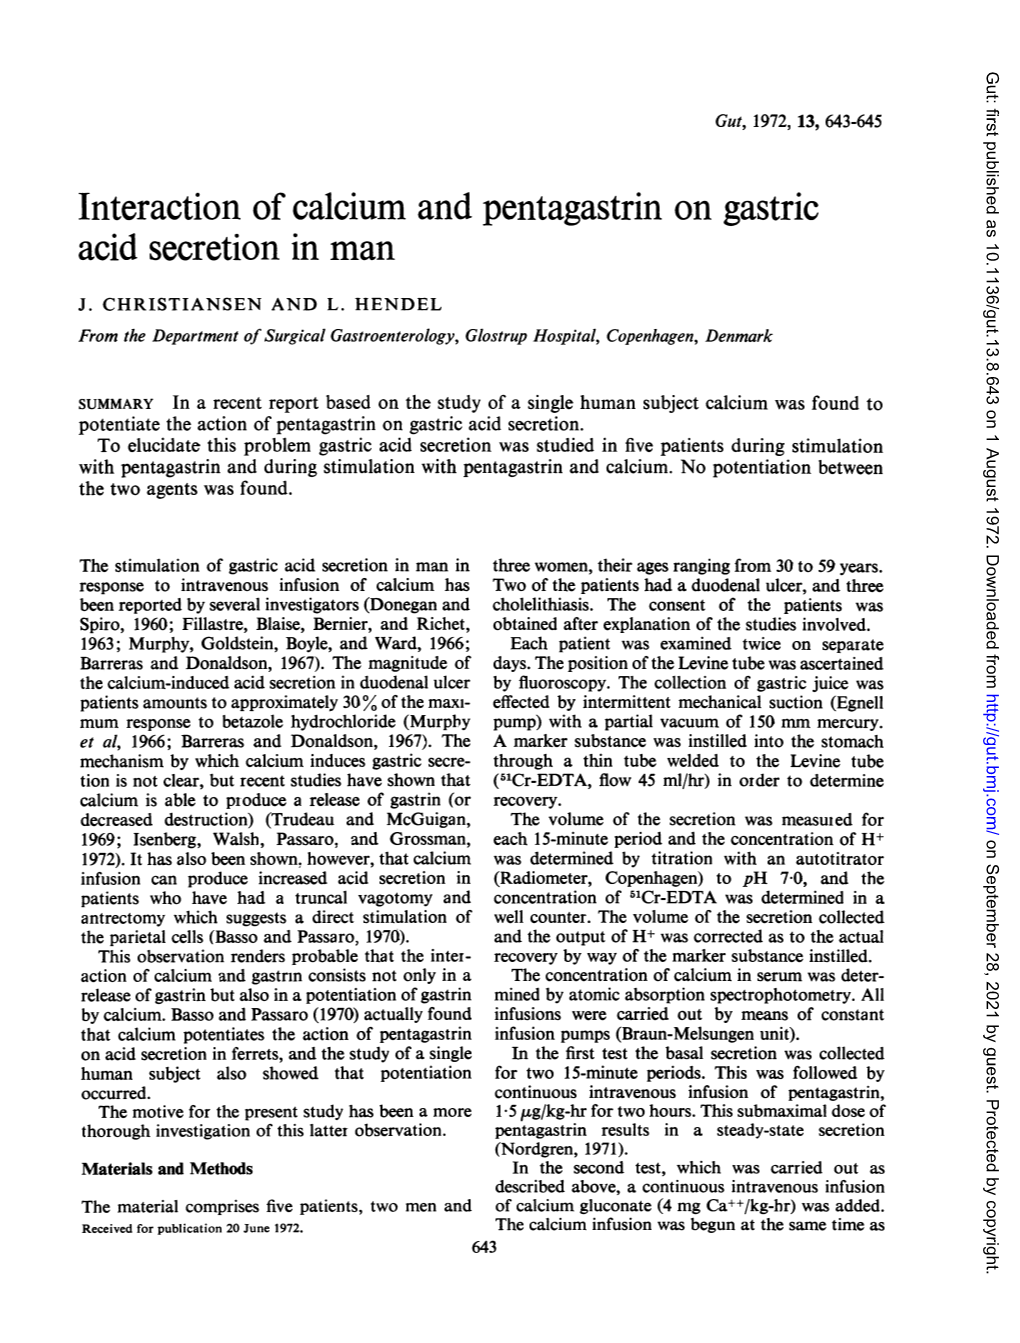 Interaction of Calcium and Pentagastrin on Gastric Acid Secretion in Man